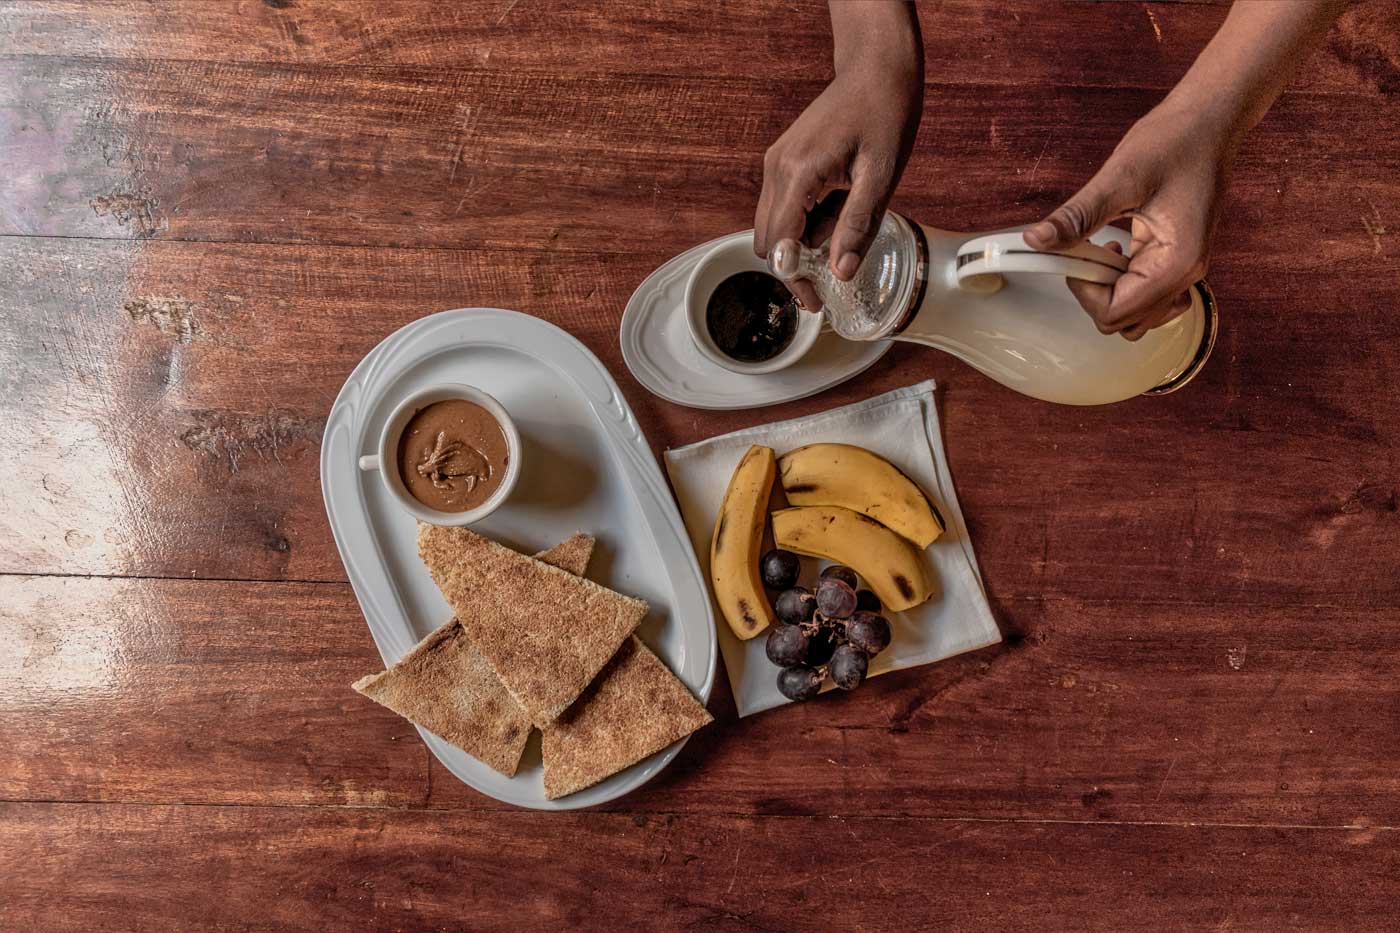 table with haitian coffee, cassava, fruits and peanut butter